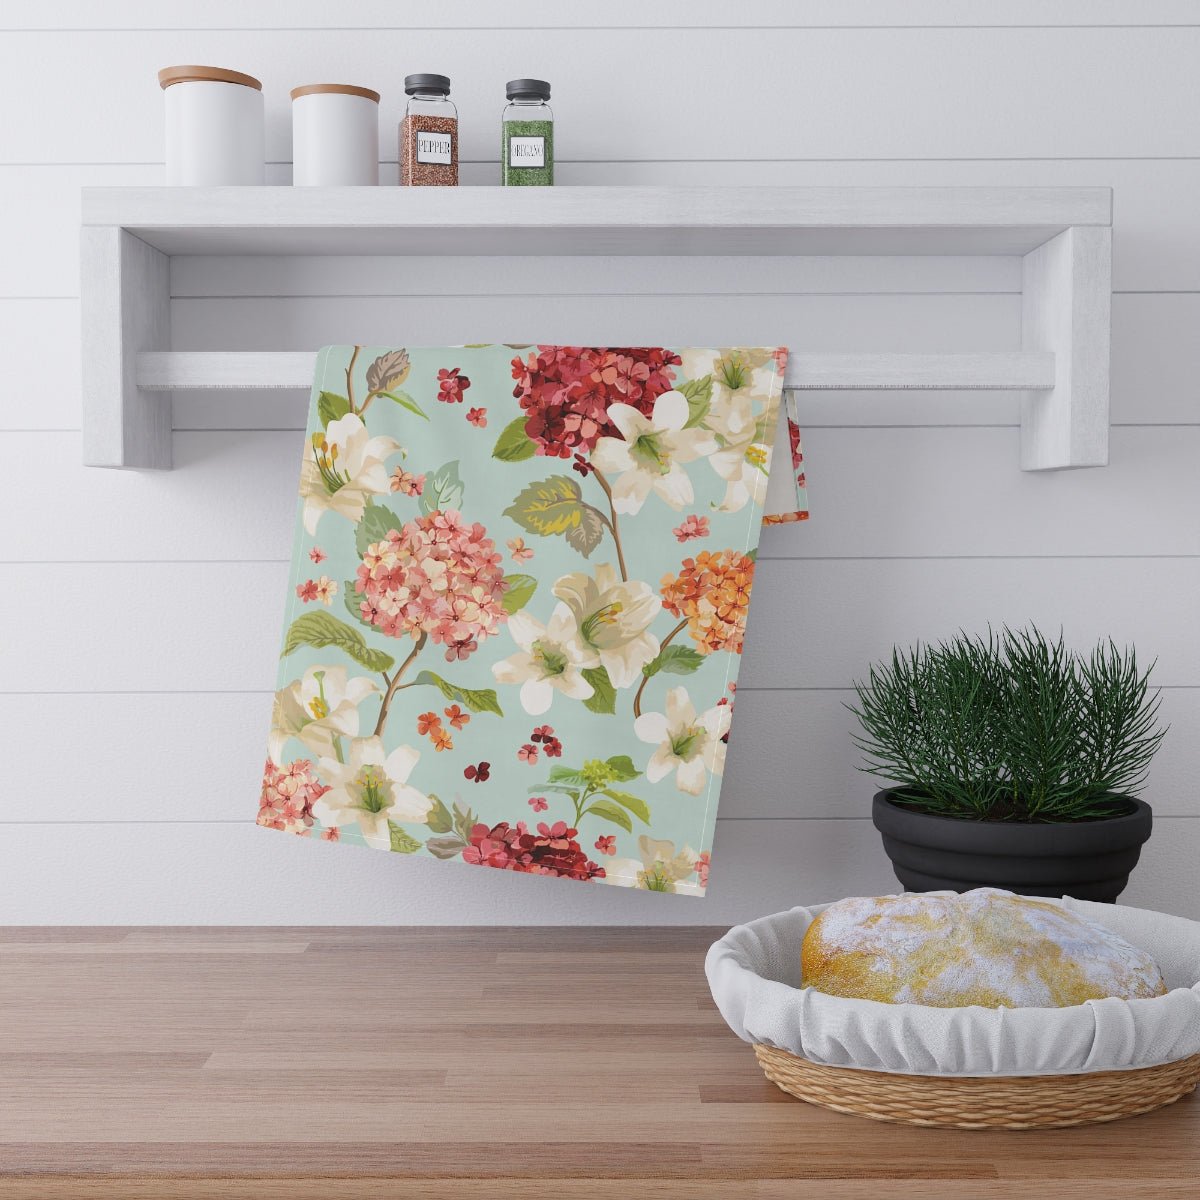 Autumn Hortensia and Lily Flowers Kitchen Towel - Puffin Lime